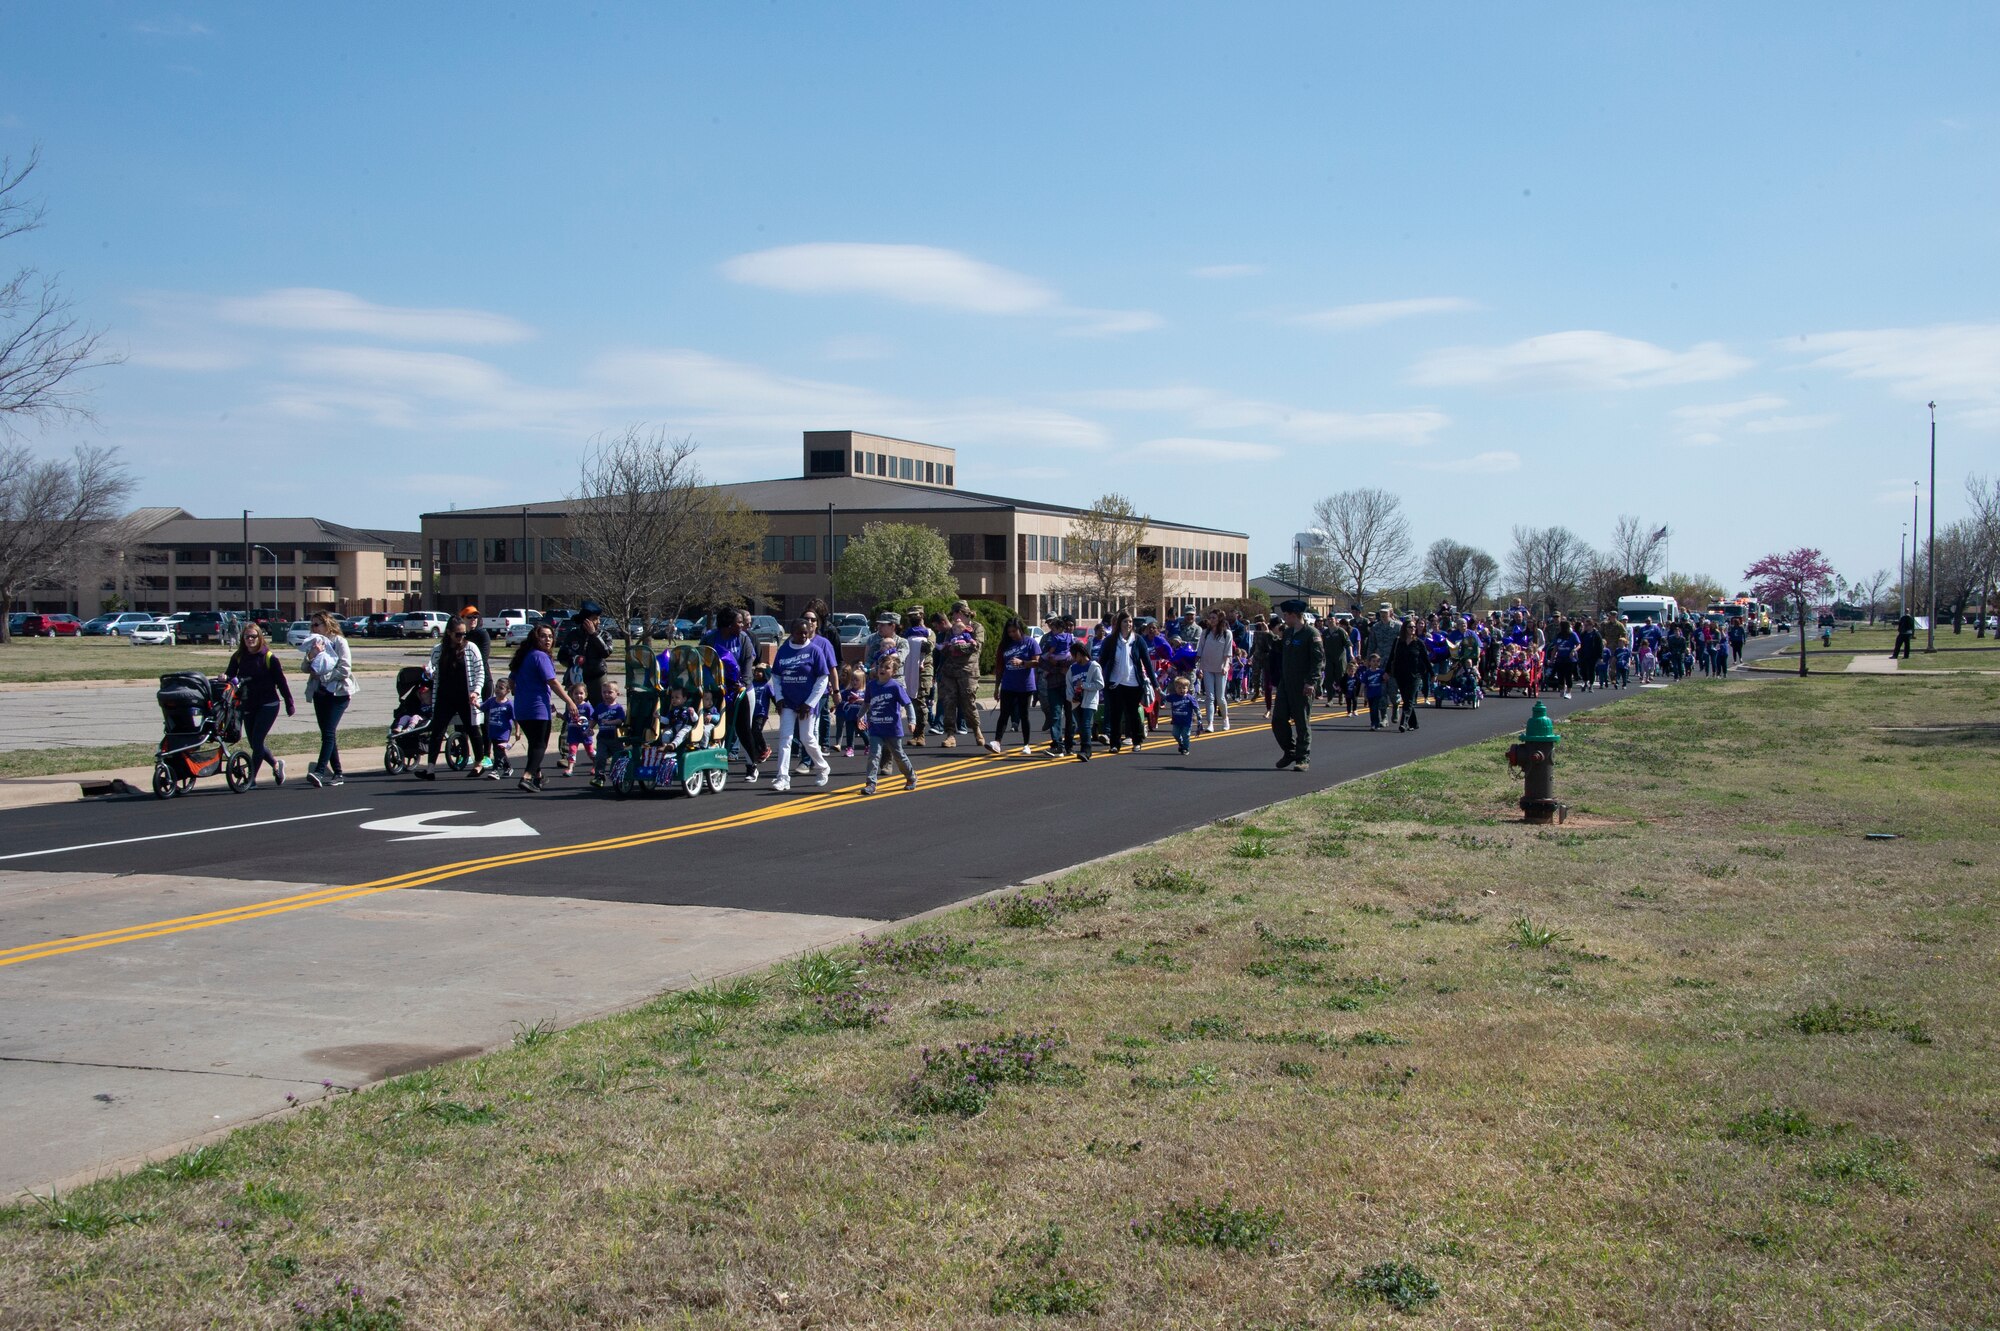 Members of the Month of the Military Child parade walk across the base, April 1, 2019, at Altus Air Force Base, Okla. Members across the base walked from Wings of Freedom Park to the youth center. (U.S. Air Force photo by Senior Airman Cody Dowell)